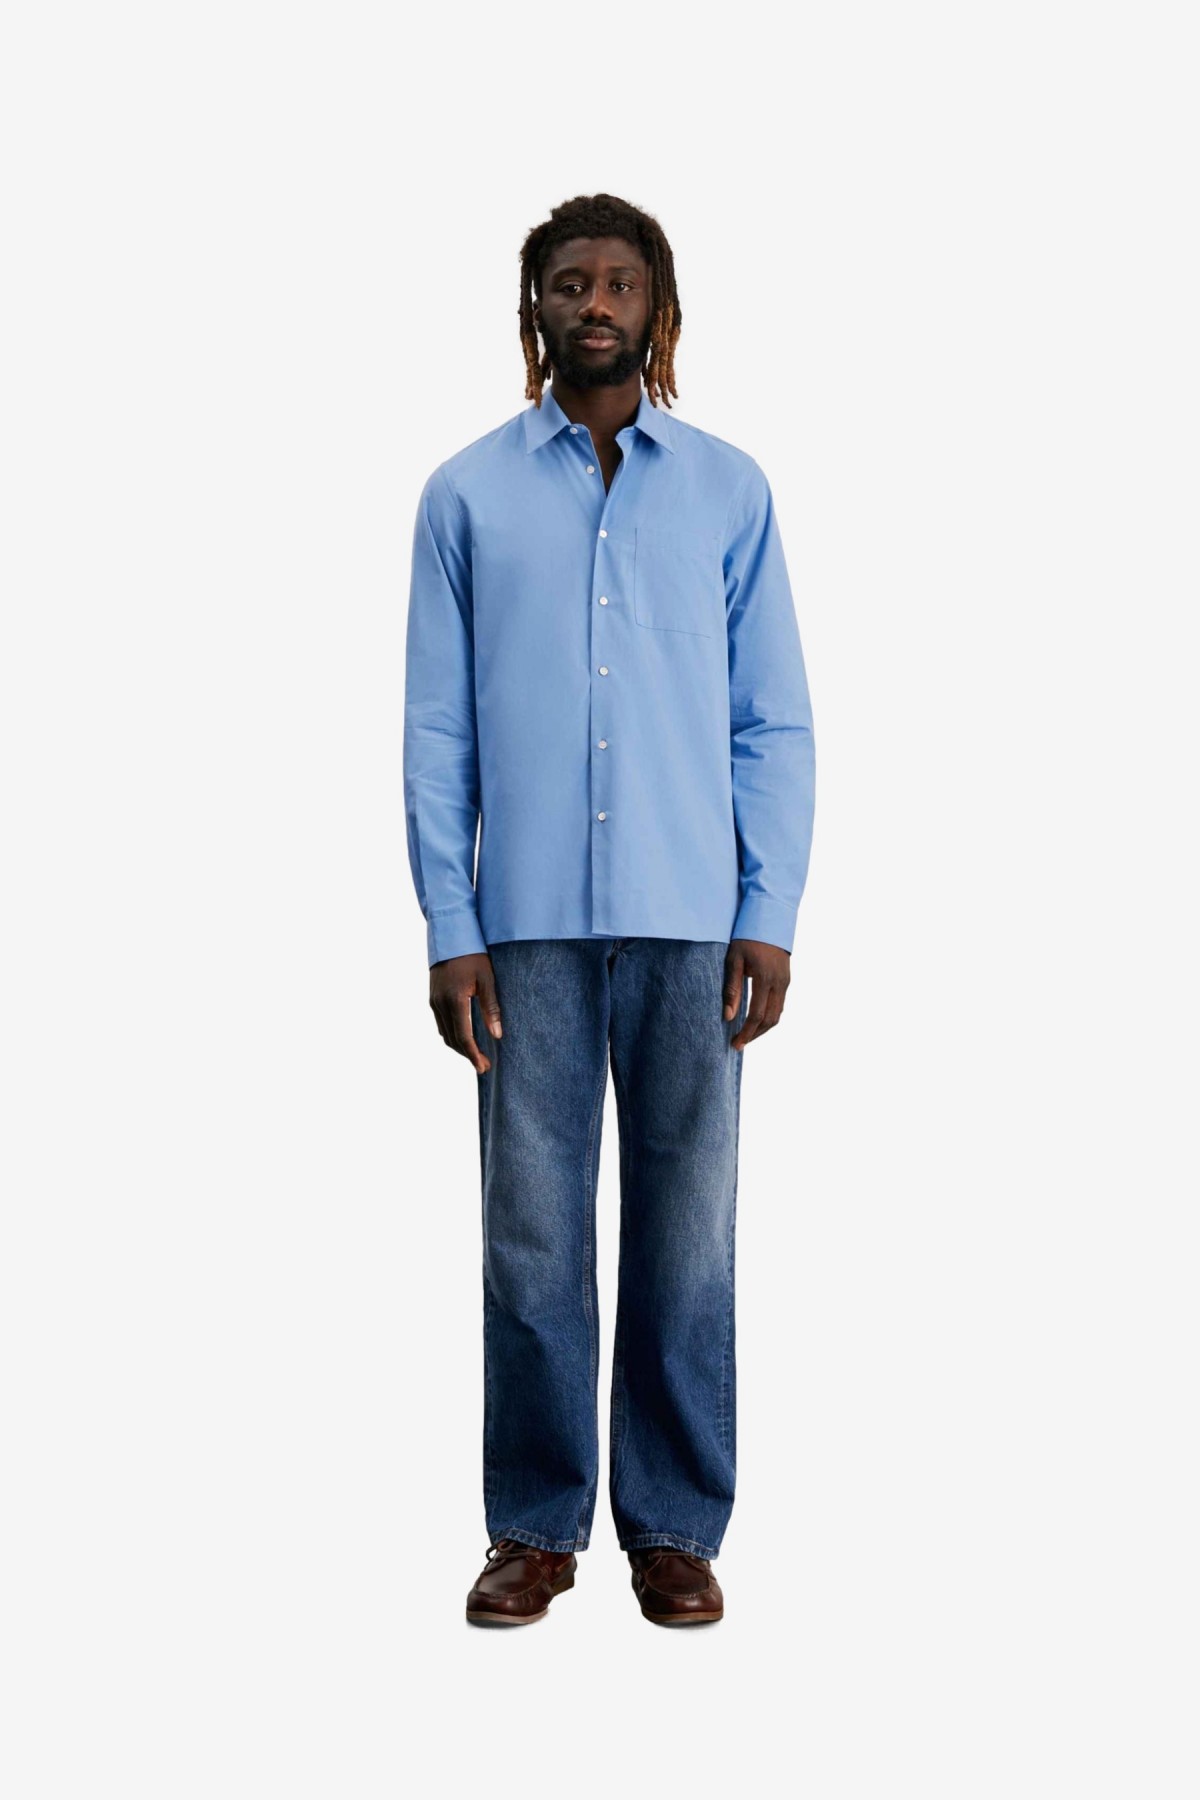 Another Aspect Shirt 3.0 in Capri Blue